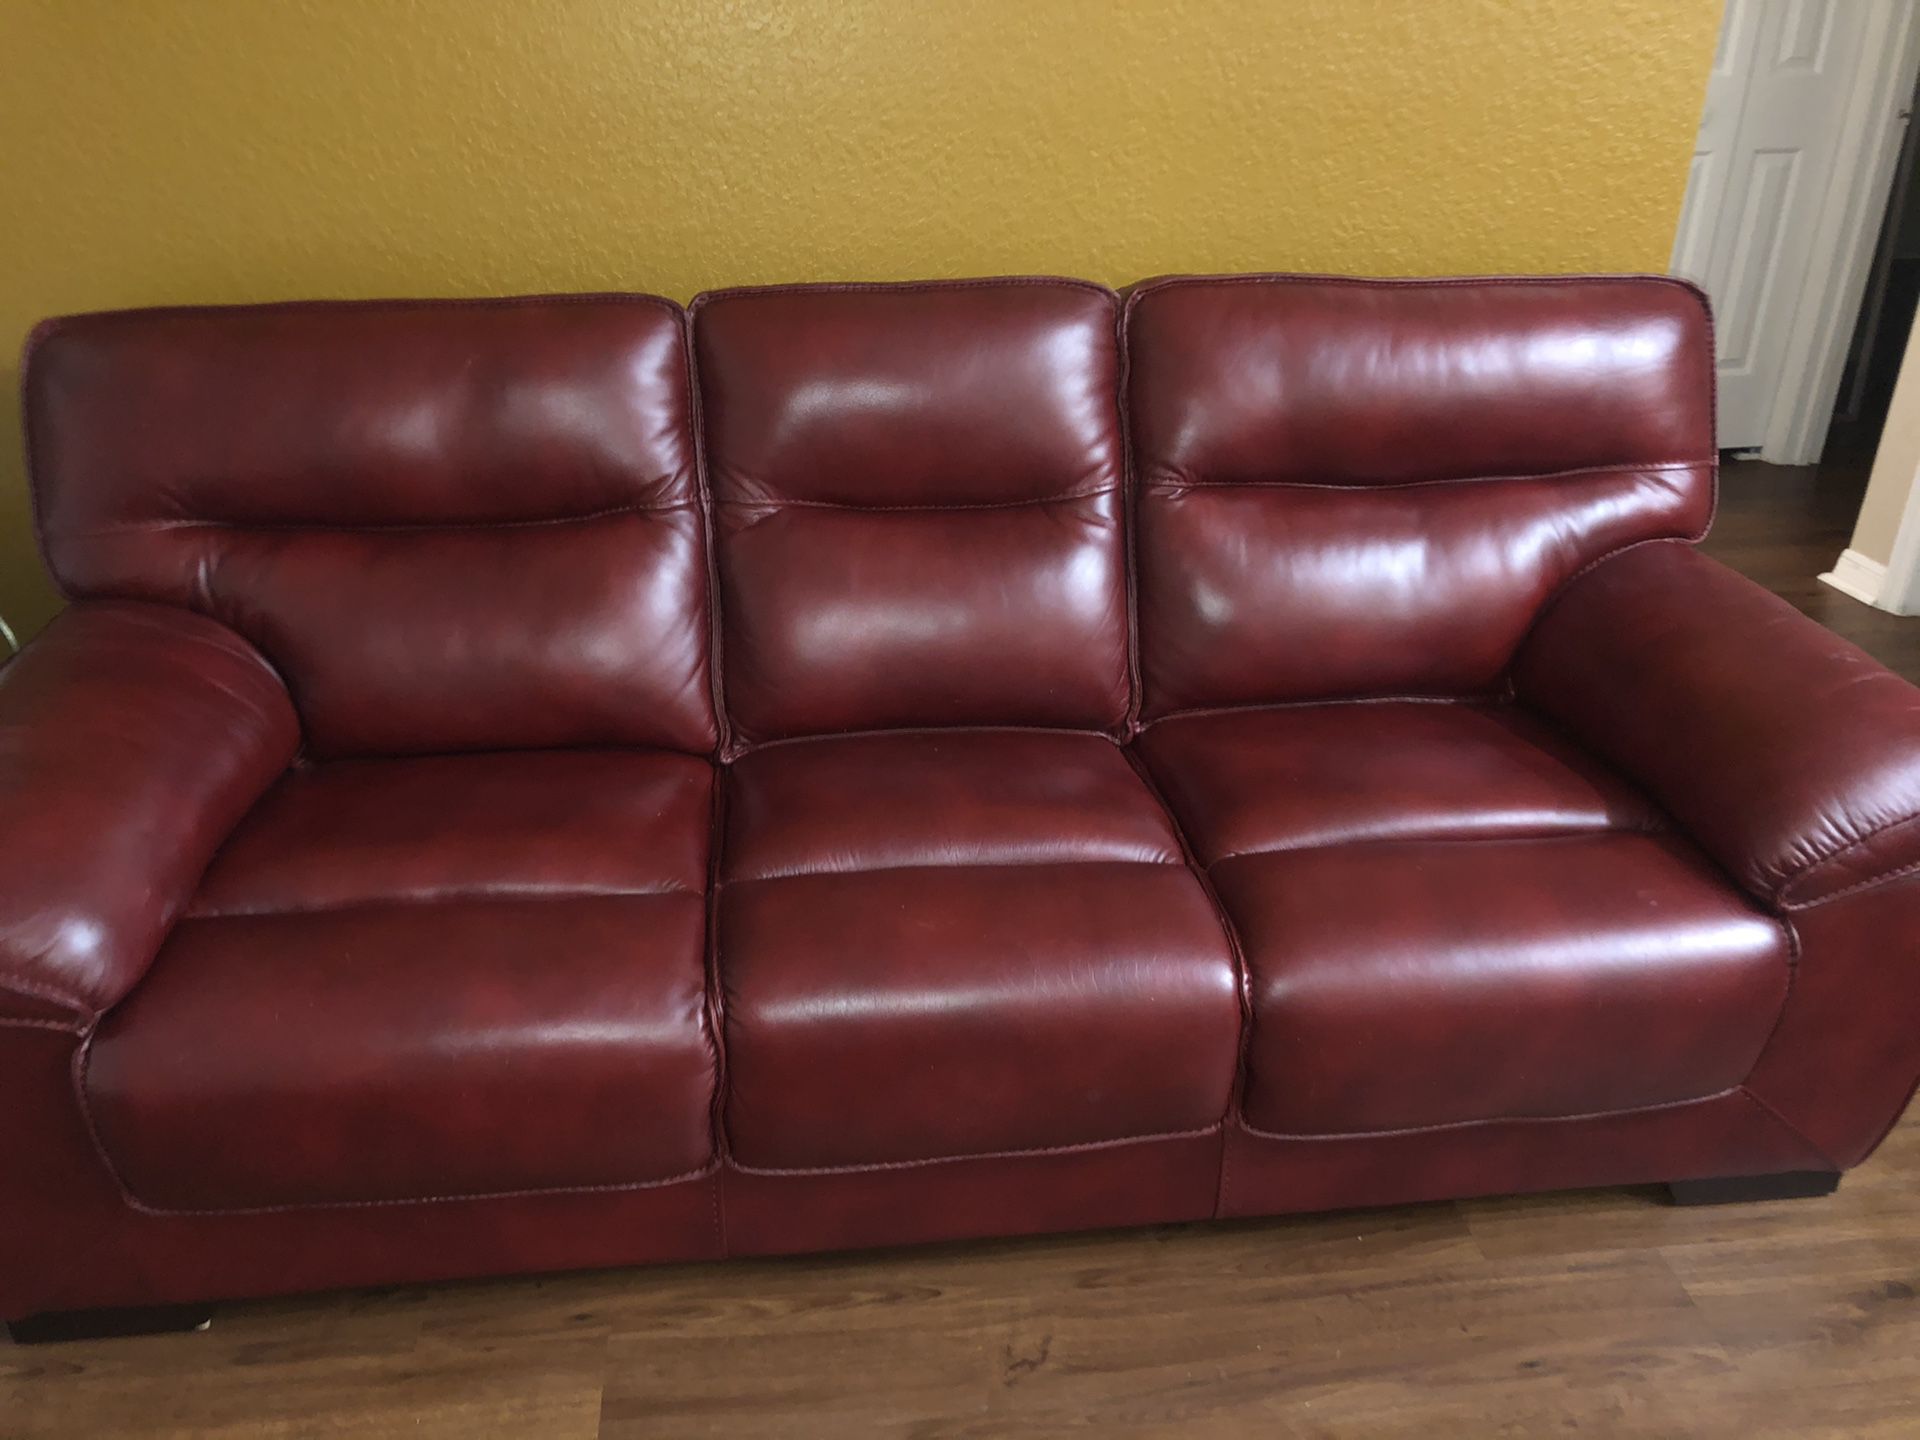 Like new Red Wine beautiful leather couch,love seat and 2 glass tables from Rooms to go $395